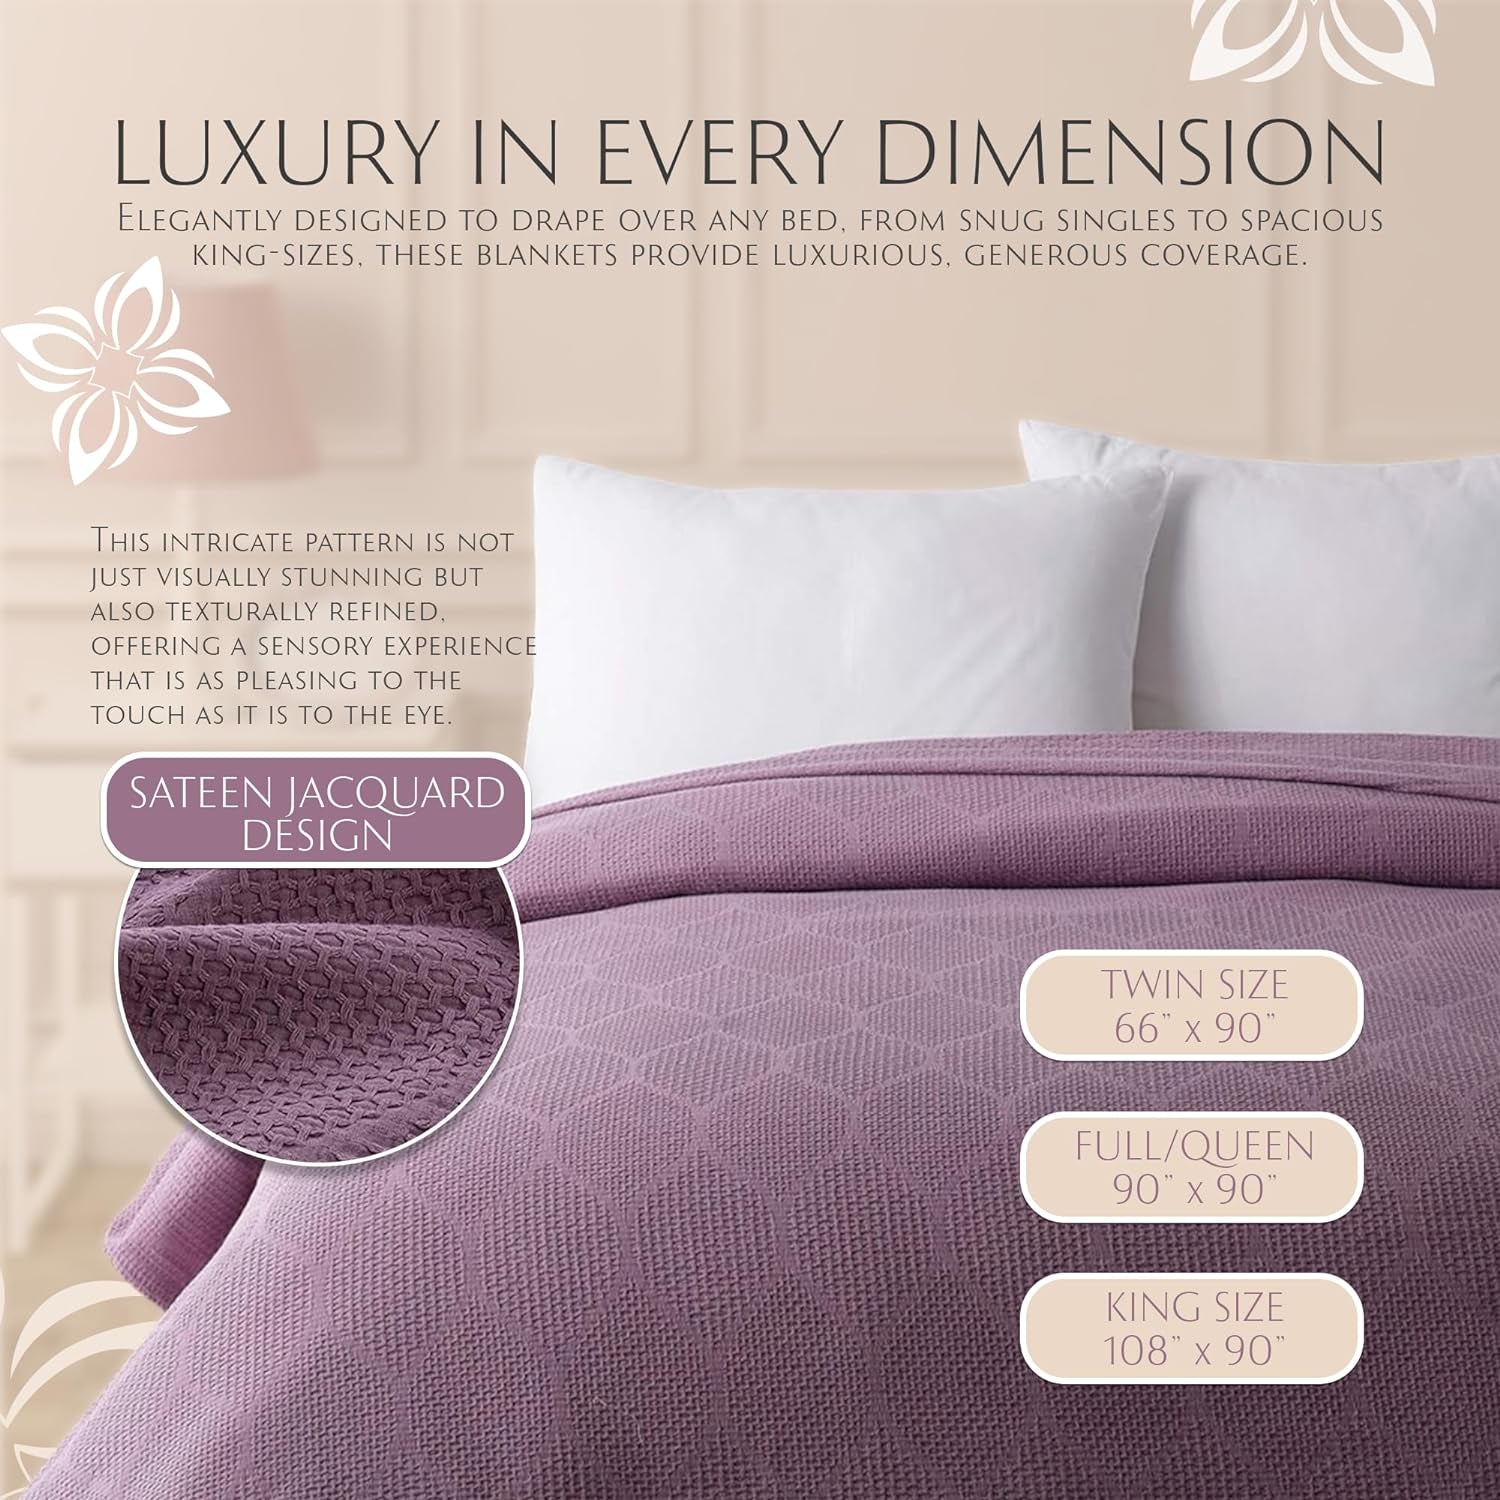 Thin Lightweight Cotton Blankets Skin-Friendly, Breathable, and Fade-Resistant - Modern Bedding Essentials for Year-Round Comfort, Style, and Quality Sleep Experience. Twin Size 66”X 90” - Plum